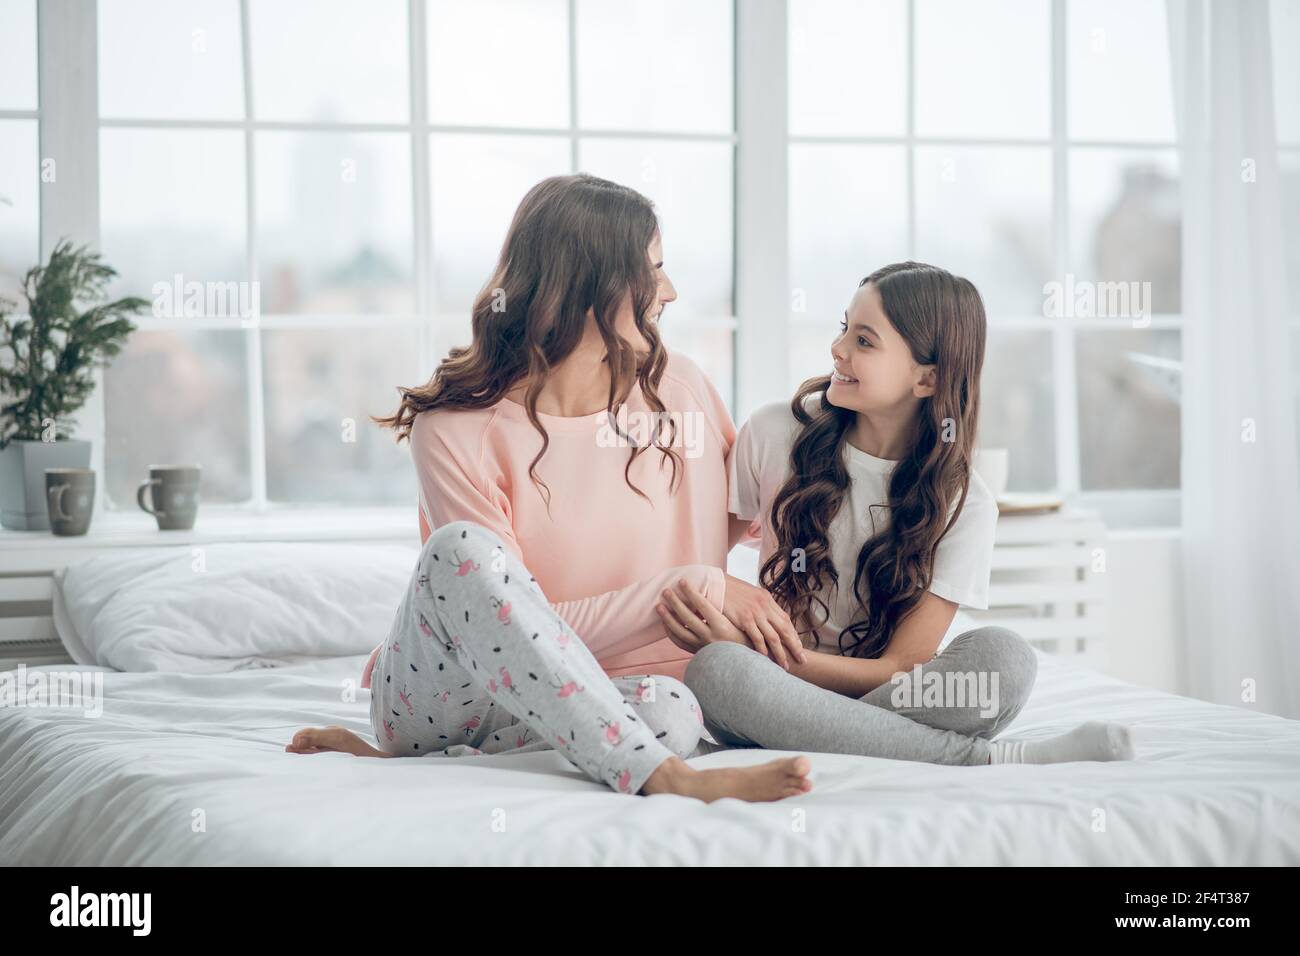 Mom and daughter in pajamas sitting on bed Stock Photo